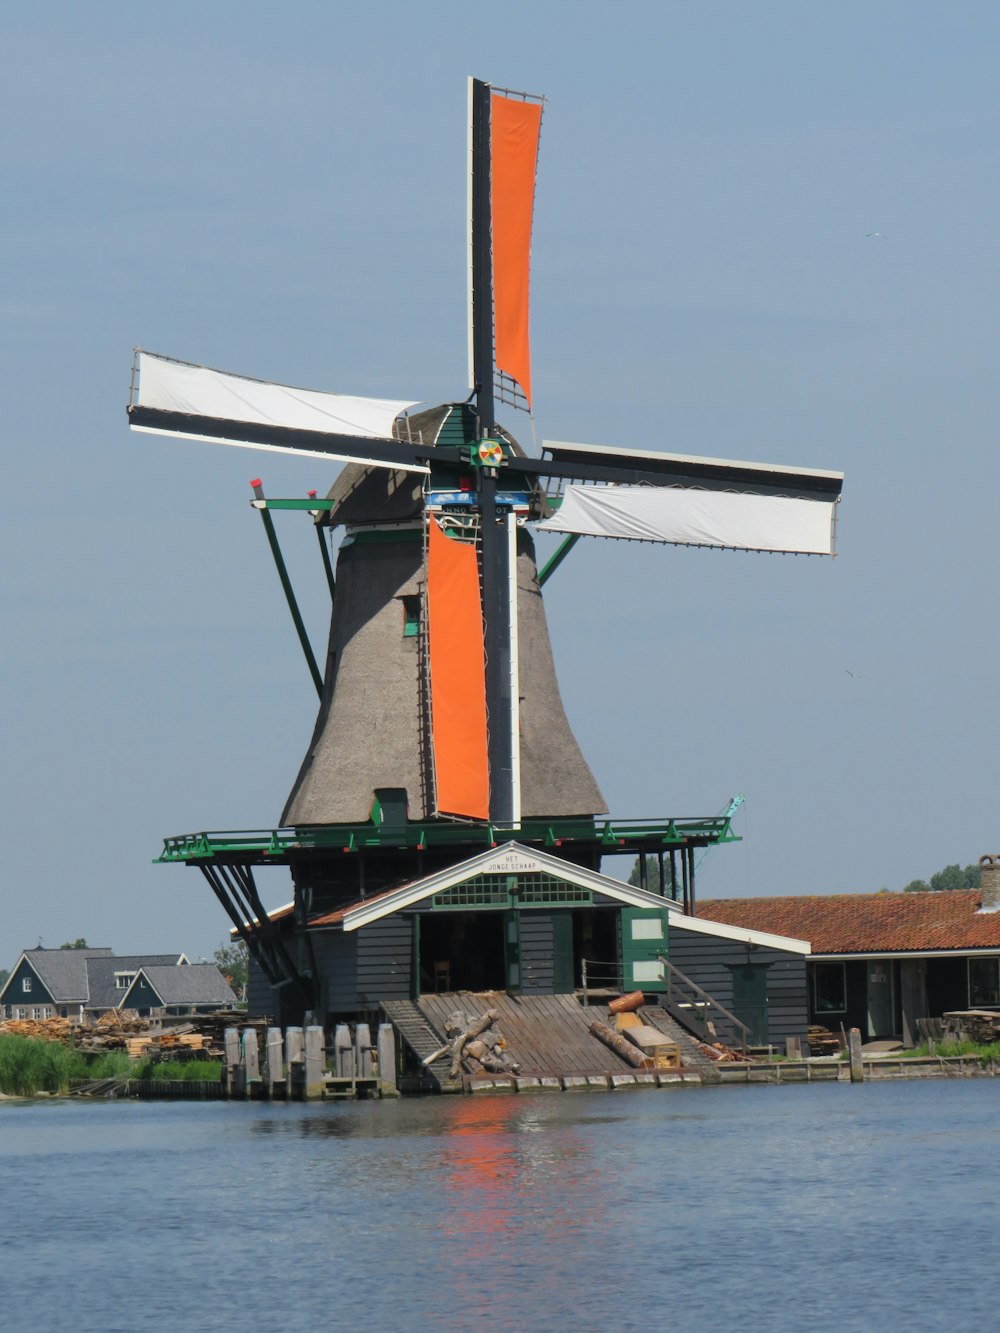 orange and white windmill near body of water during daytime